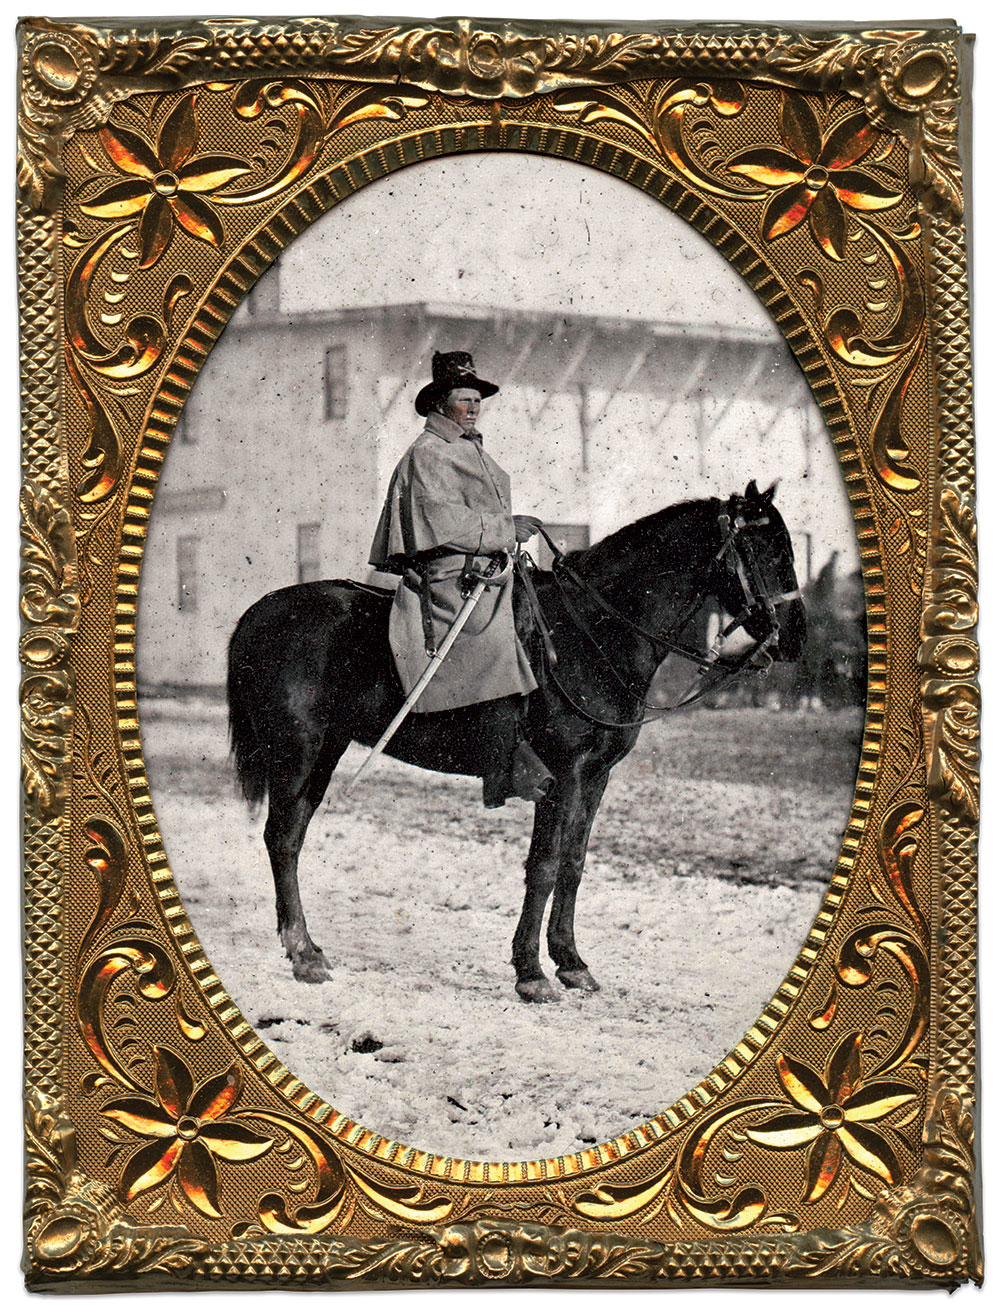 Quarter plate ambrotype by an unidentified photographer.Paul Russinoff Collection.